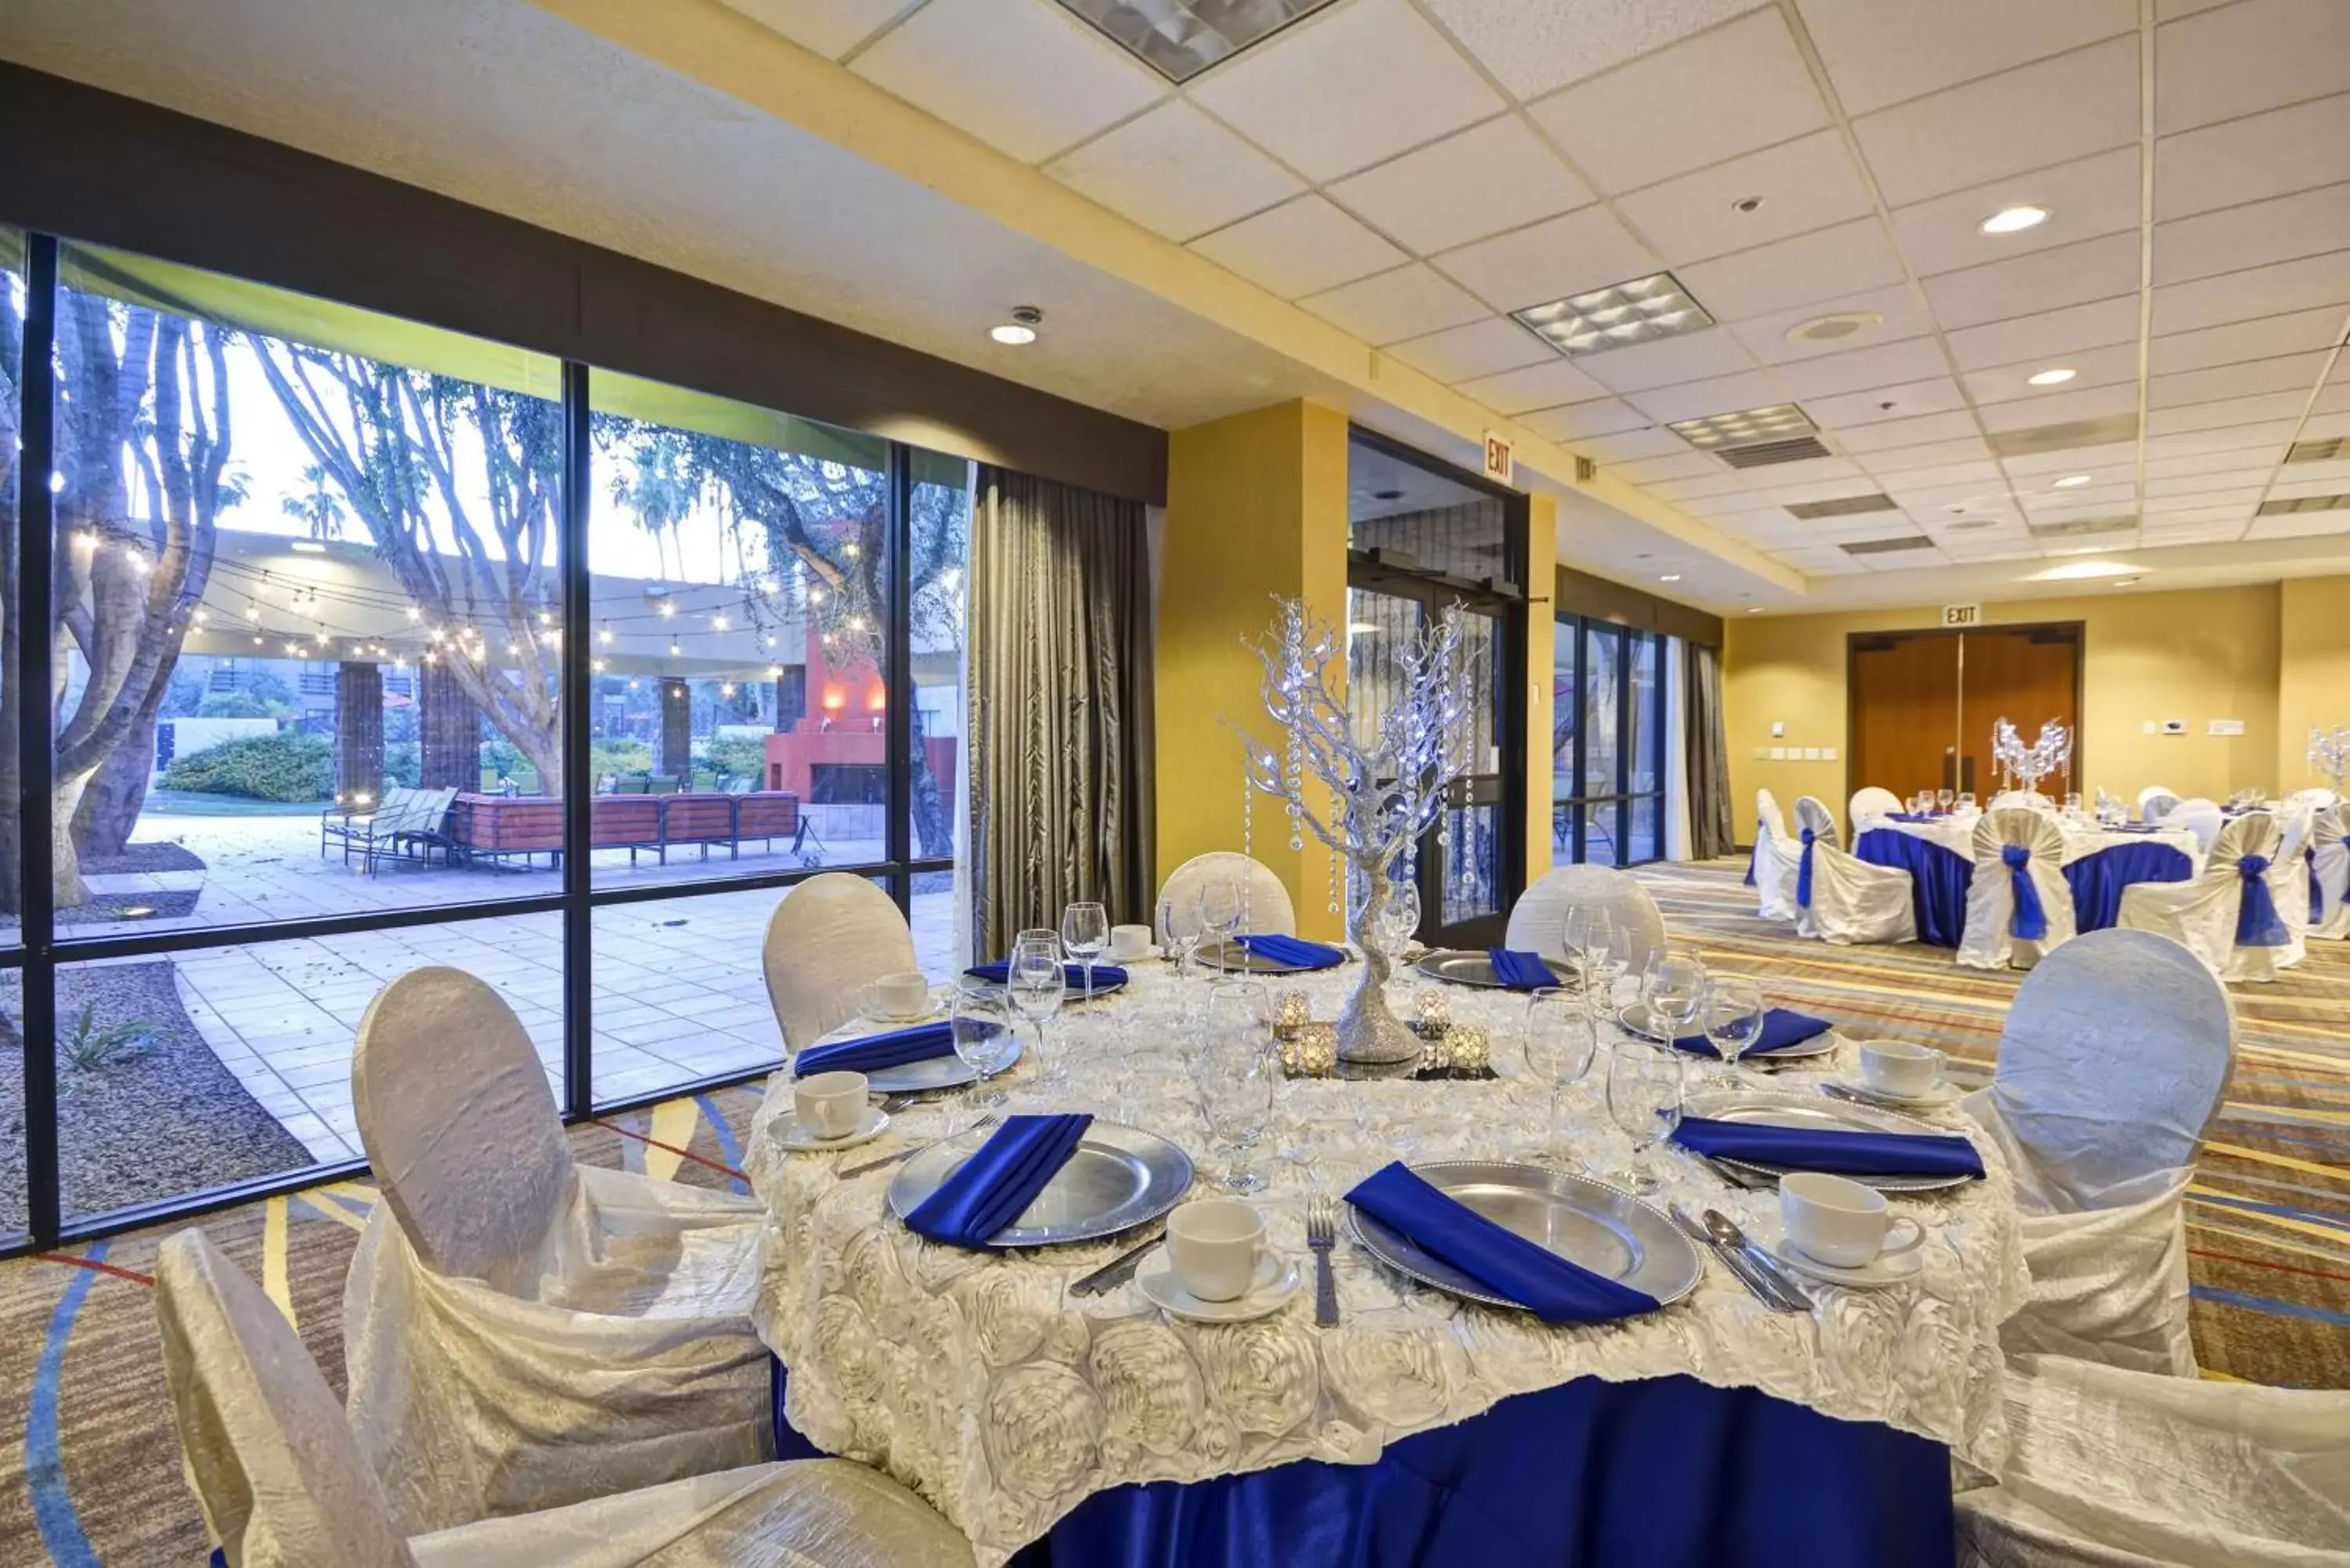 Meeting/conference room, Banquet Facilities in DoubleTree by Hilton Phoenix North